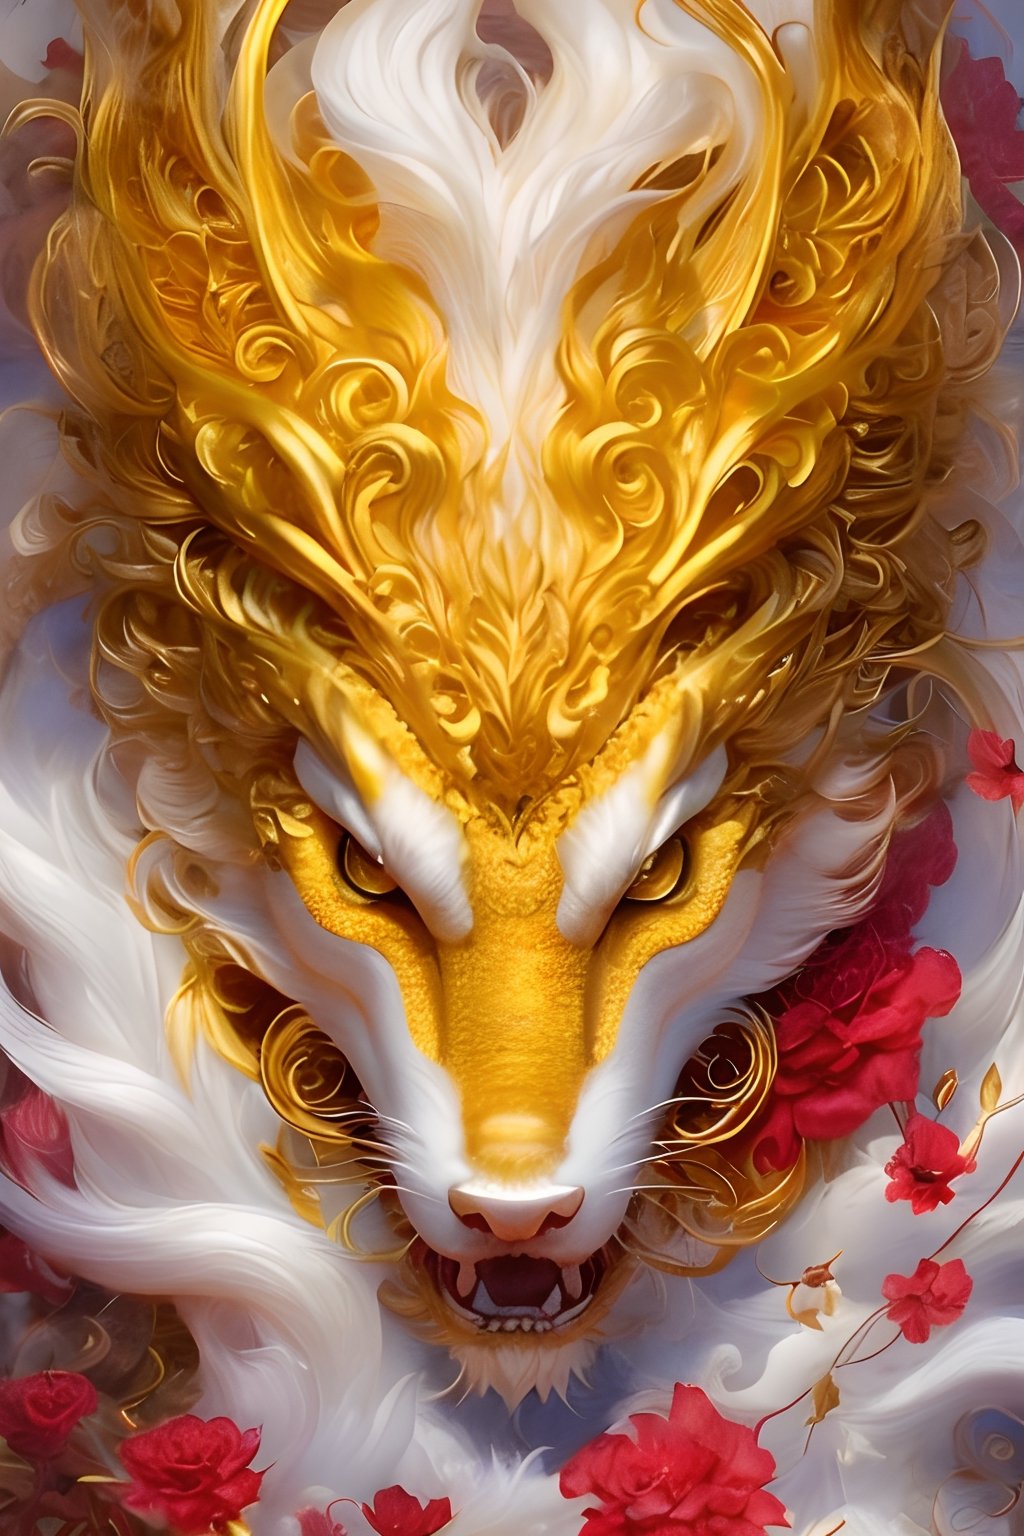 In a fantastical display of artistry, the image depicts a dragon. This mythical creature is showcased in all its glory, with lush fur flowing in vibrant shades of gold, red, and white. The image, reminiscent of an intricate painting, beautifully captures the elegance and mystique of the kitsune. Enhanced by meticulous details, every aspect of the creature is meticulously rendered, from its expressive eyes that seem to hold ancient wisdom, to the intricate patterns etched onto its sleek fur. The image radiates a sense of enchantment, leaving viewers captivated by the extraordinary beauty of this otherworldly being.,dragon